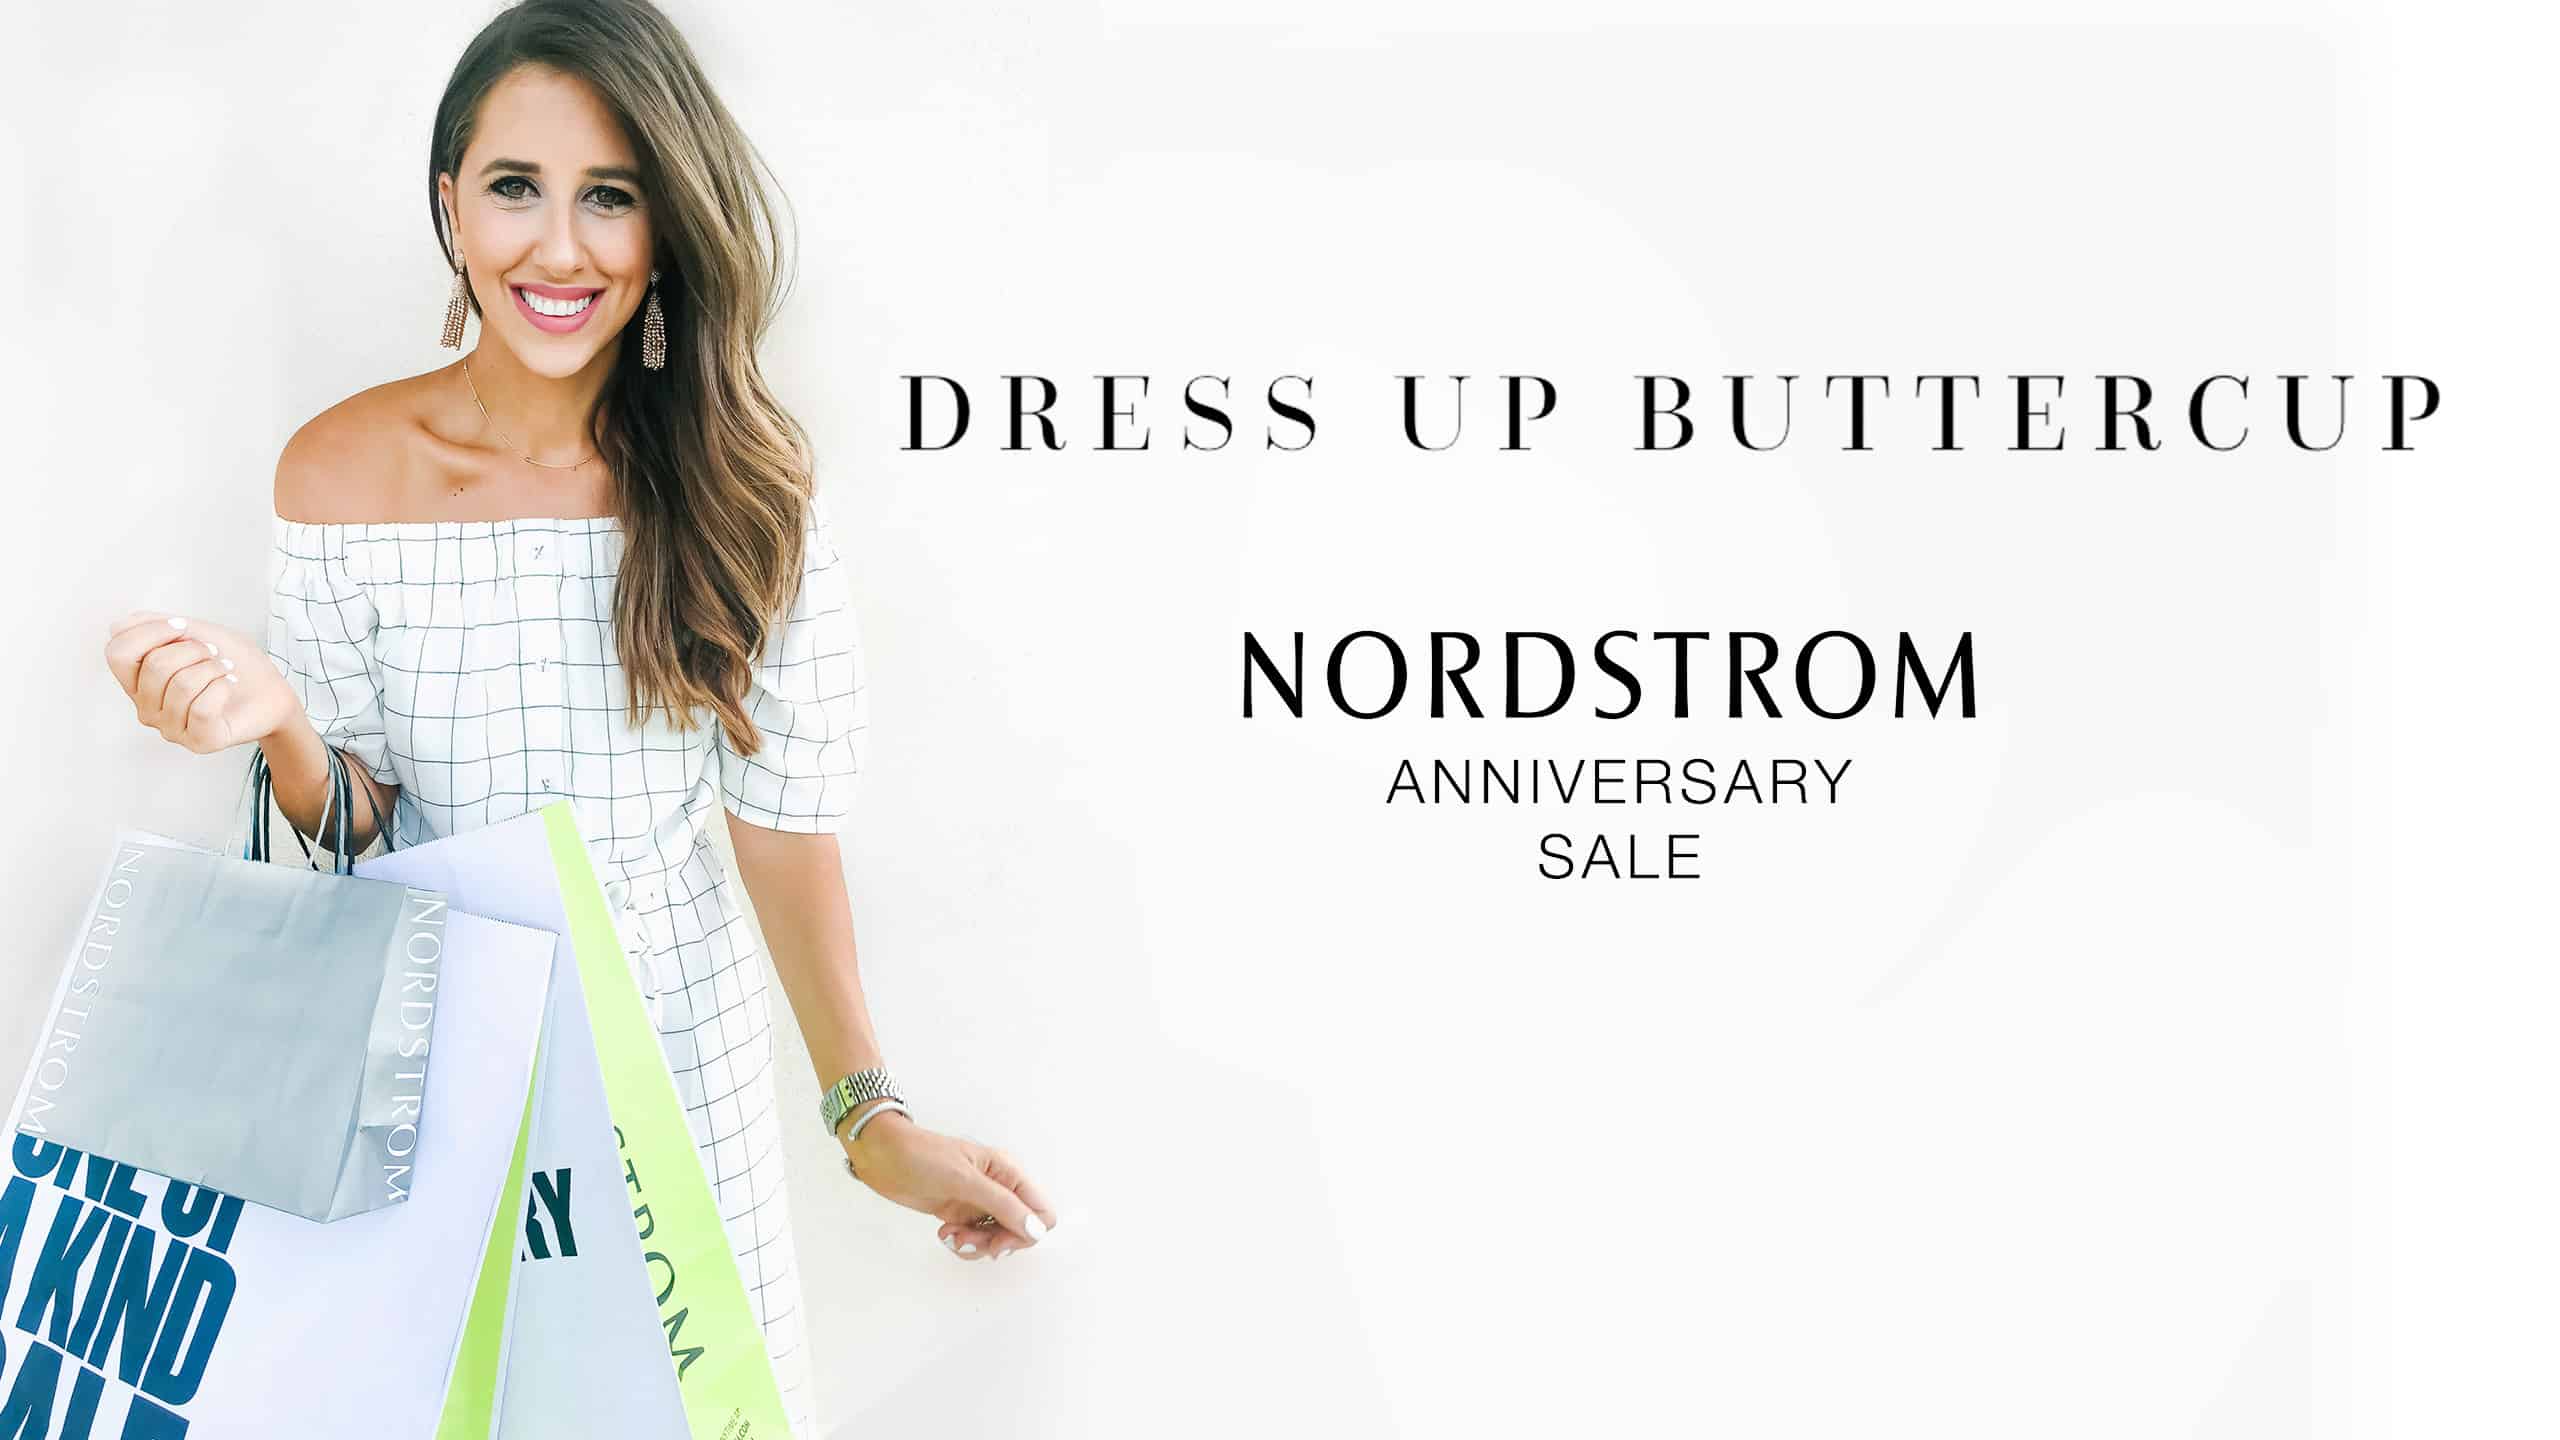 Dress Up Buttercup Nordstrom Anniversary Sale 2017